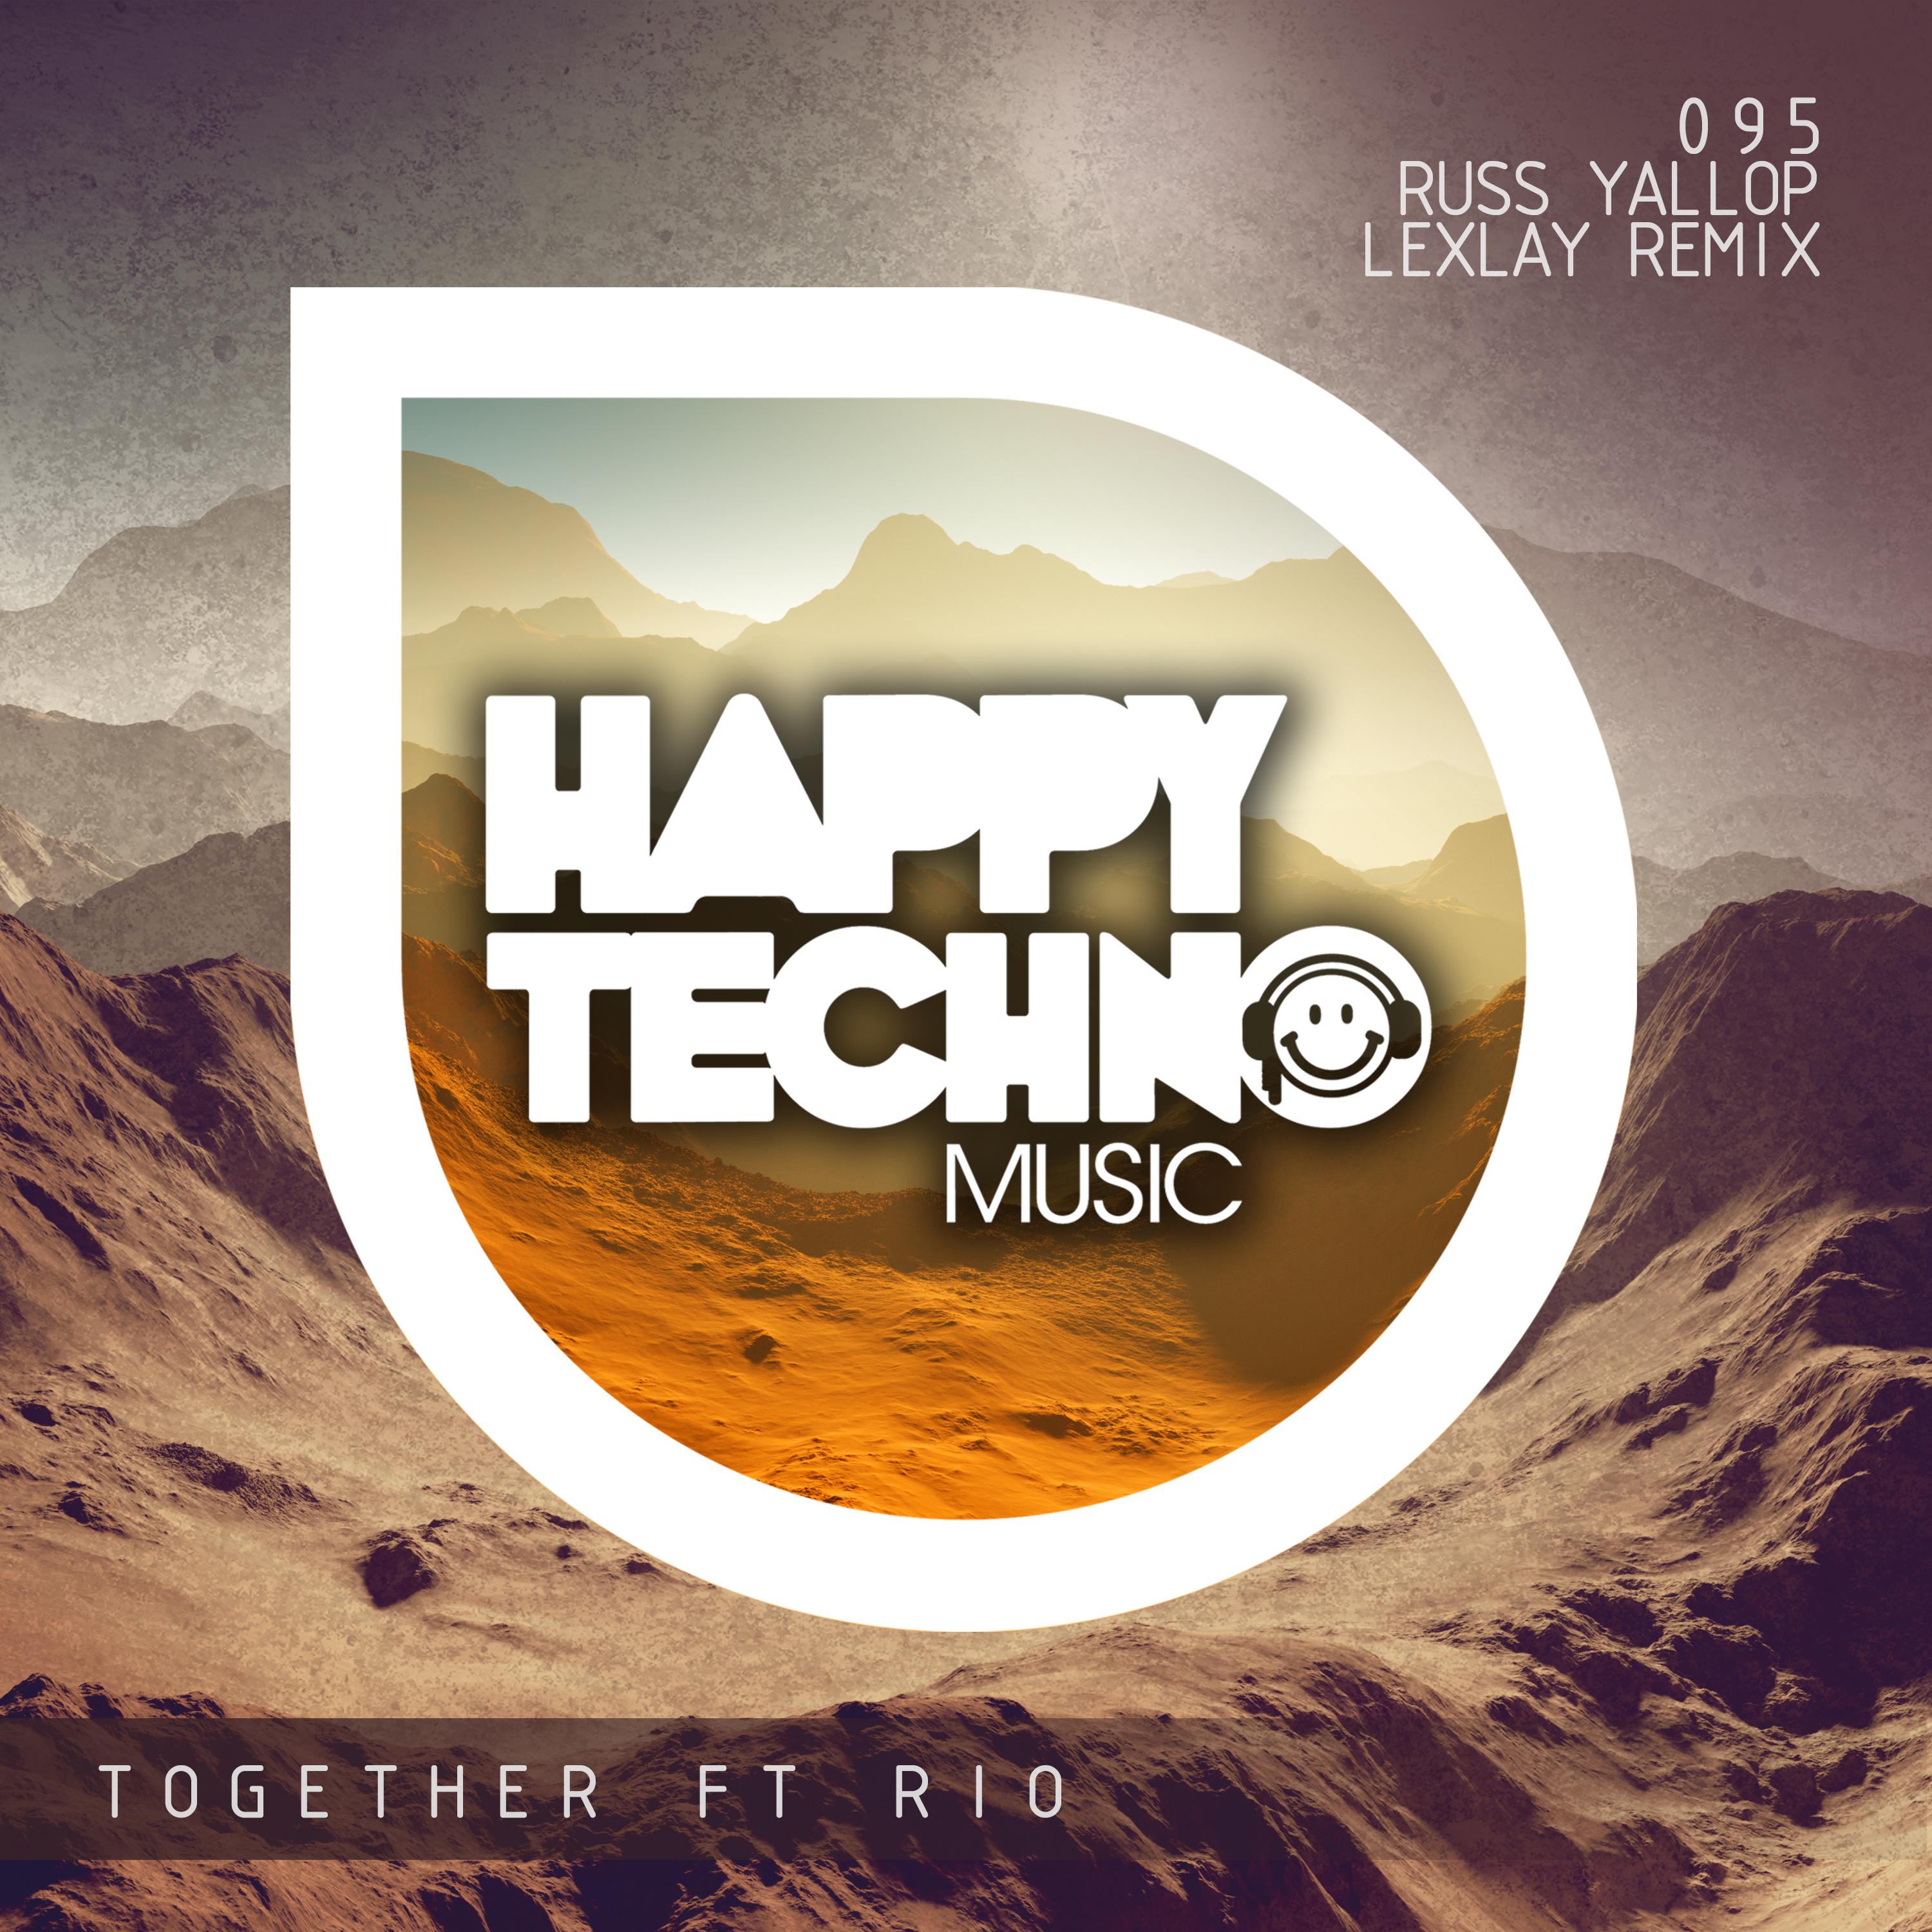 Russ Yallop - Together ft Rio